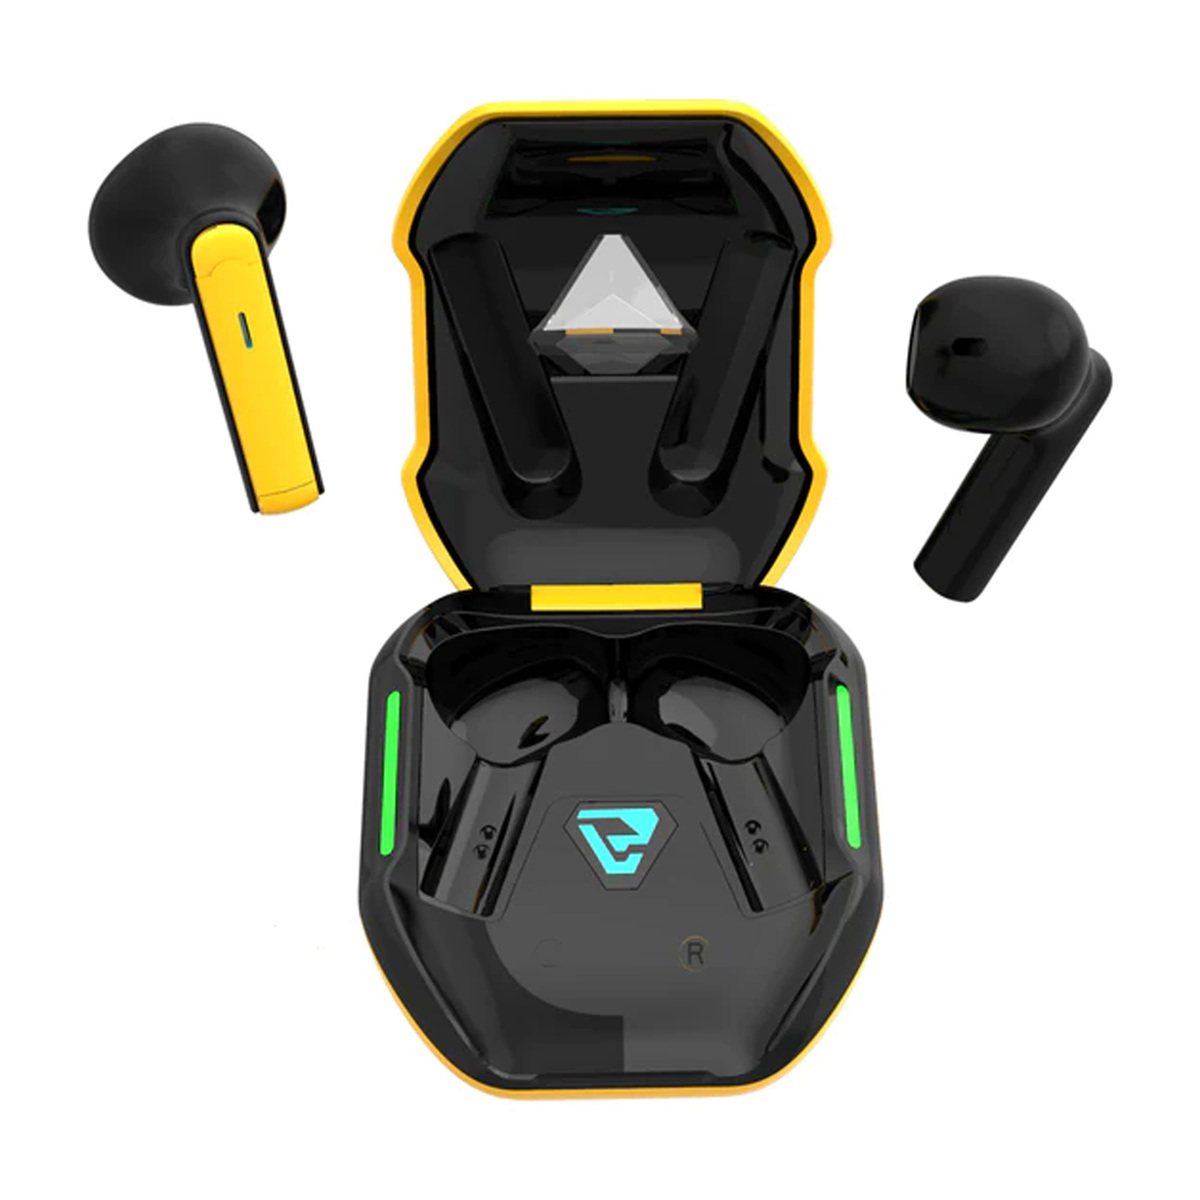 Touchmate True Wireless Earbuds for Gaming & Music,TM-BTH400Y Yellow